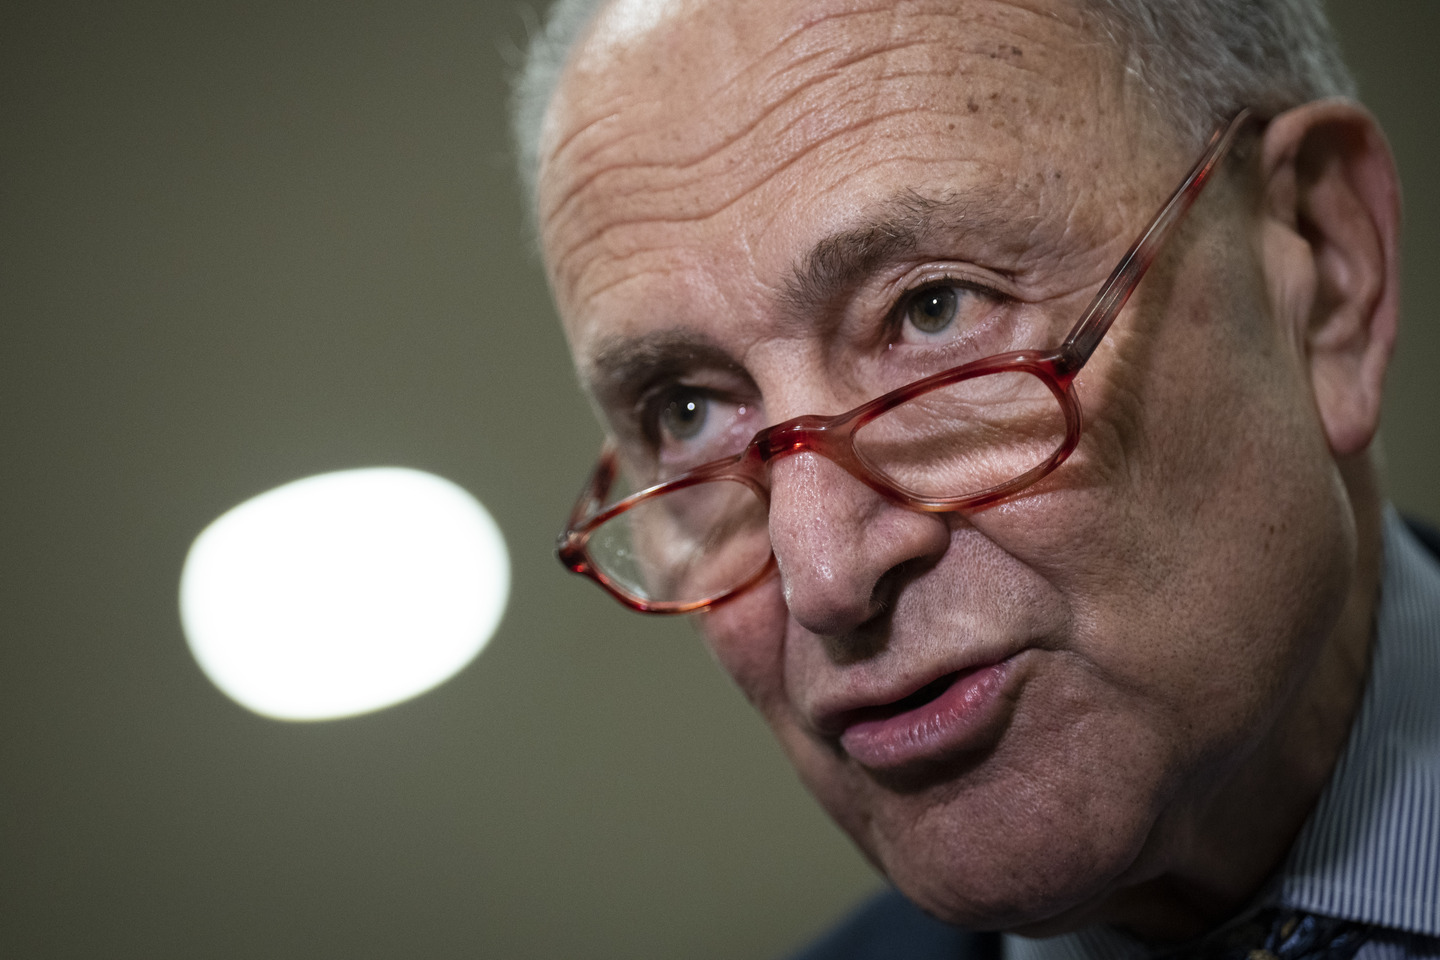 Senator Schumer's plan for AI regulation looks set to gain broad approval.